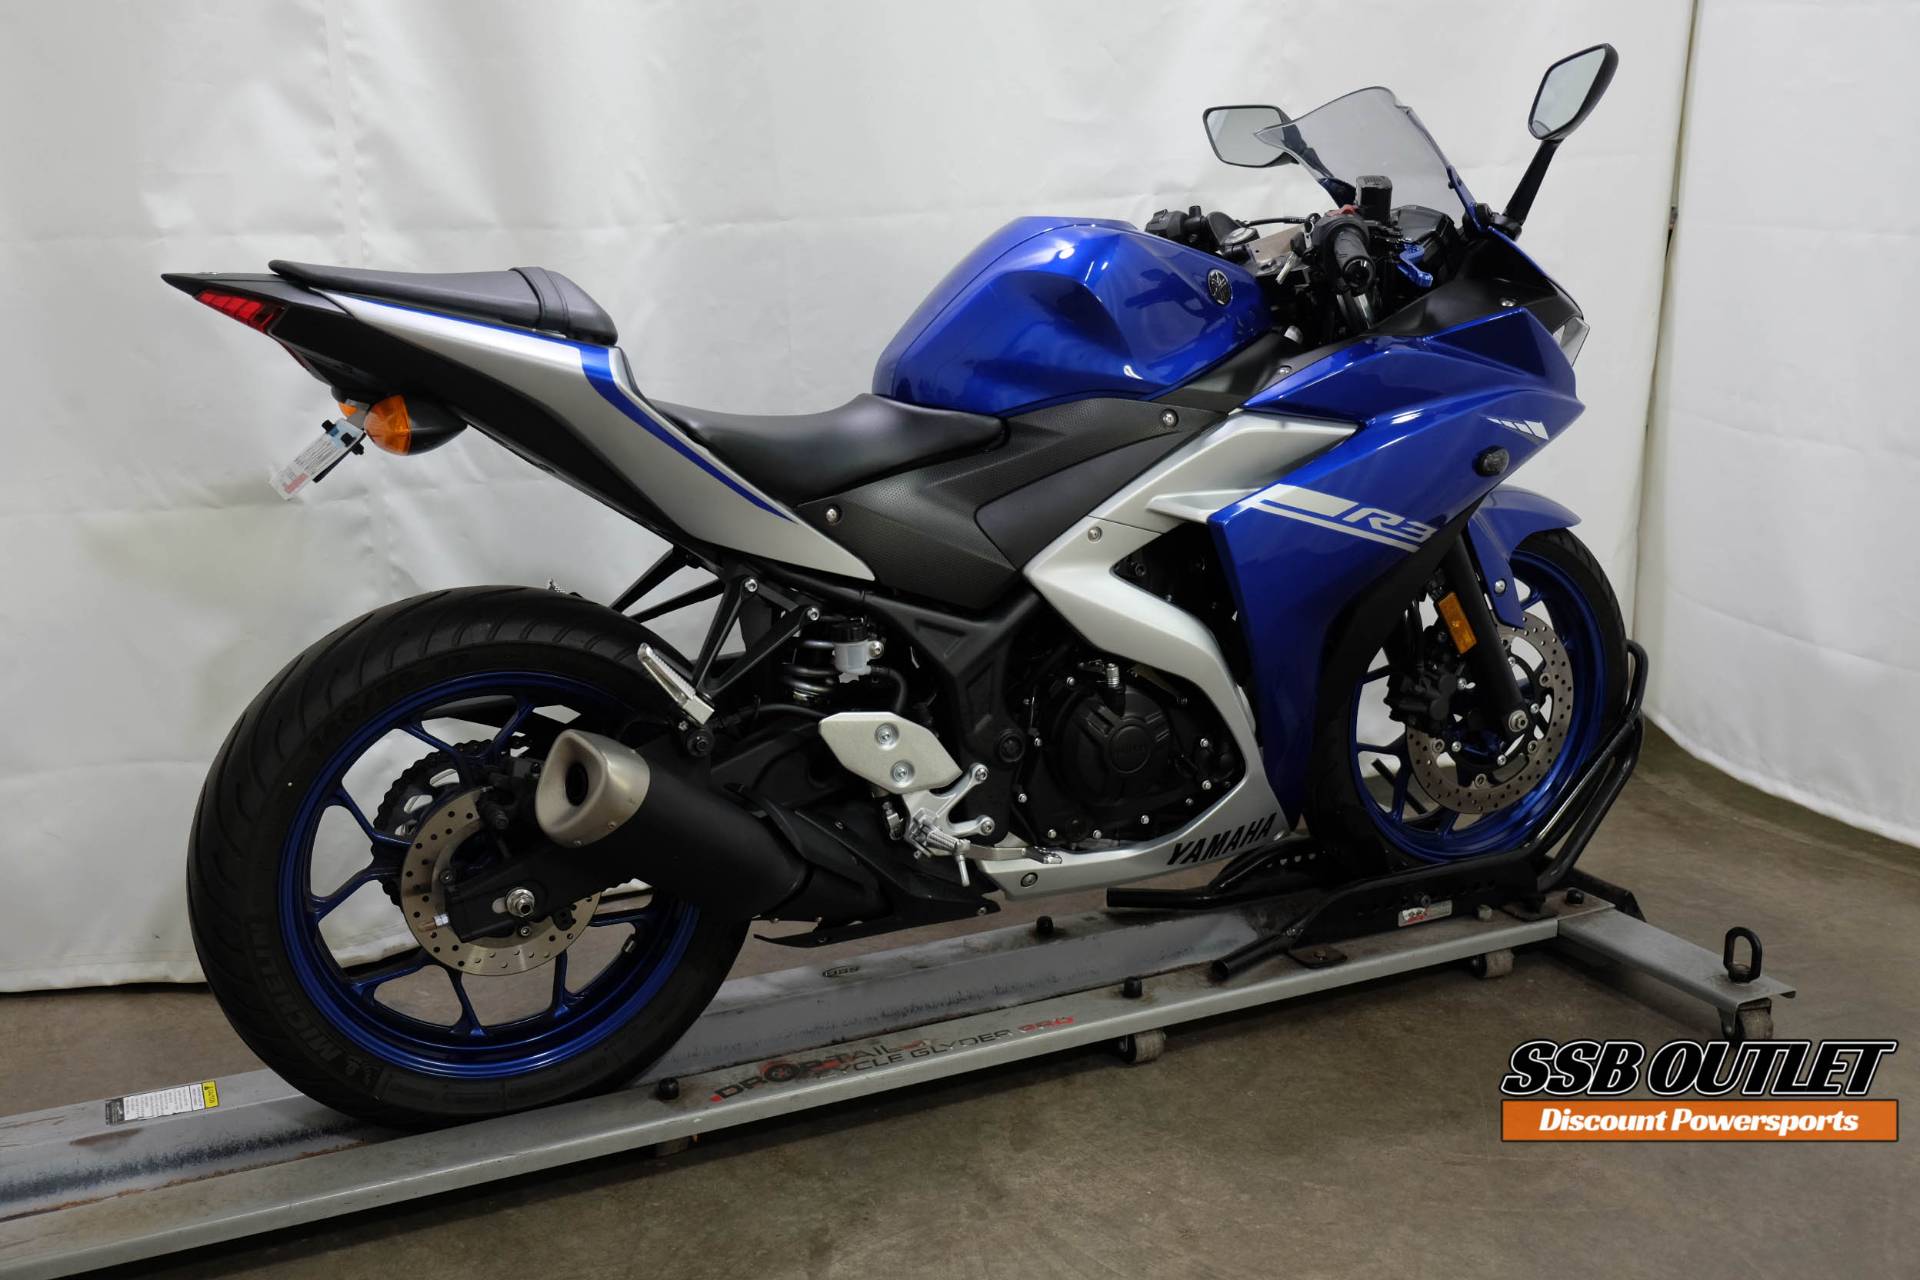 2017 Yamaha YZF-R3 | Used Motorcycle For Sale | Eden Prairie, MN ...